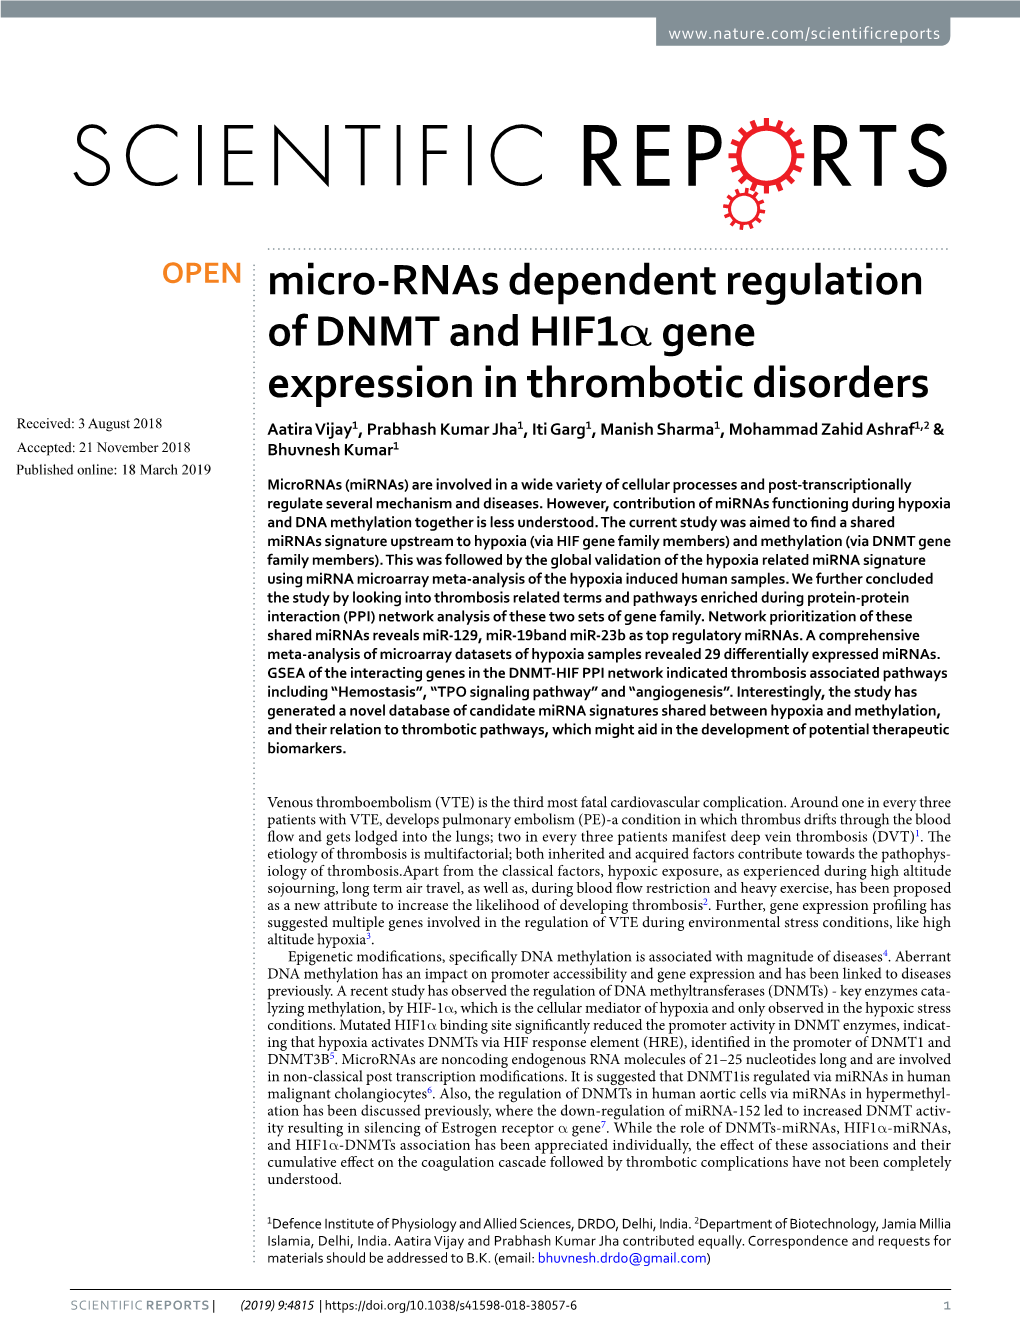 Micro-Rnas Dependent Regulation of DNMT and Hif1α Gene Expression